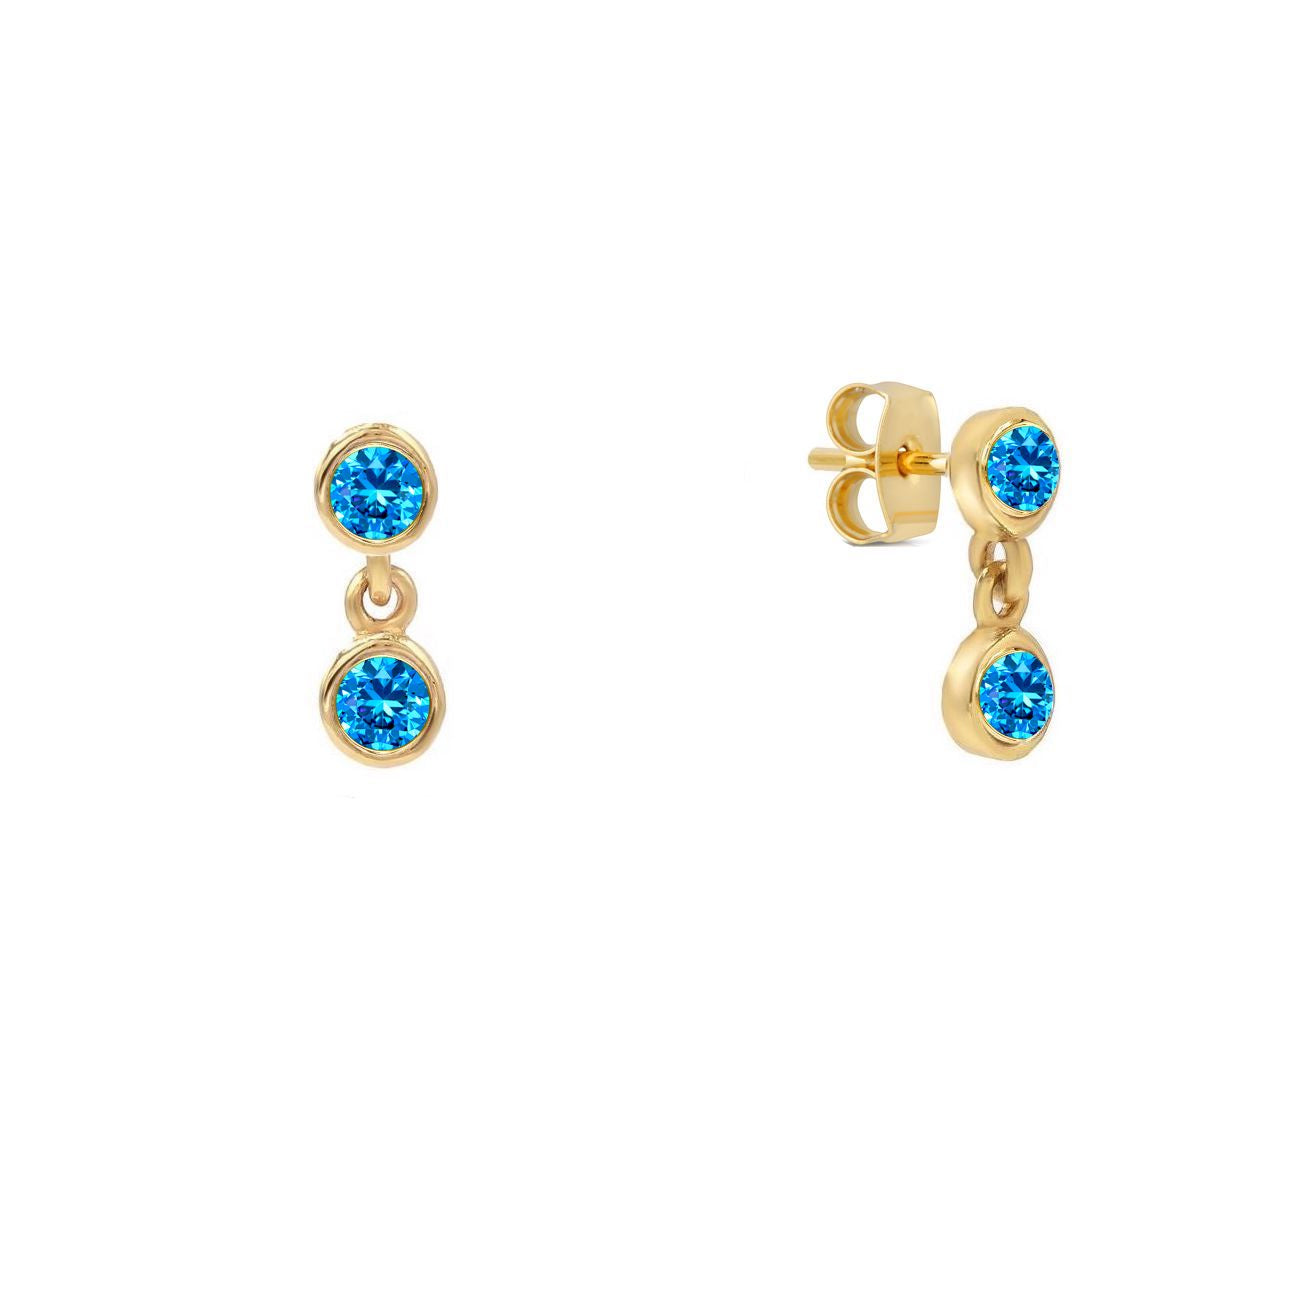 925 Silver Earrings Yellow Gold Plated with Moonstone and Blue Sapphires